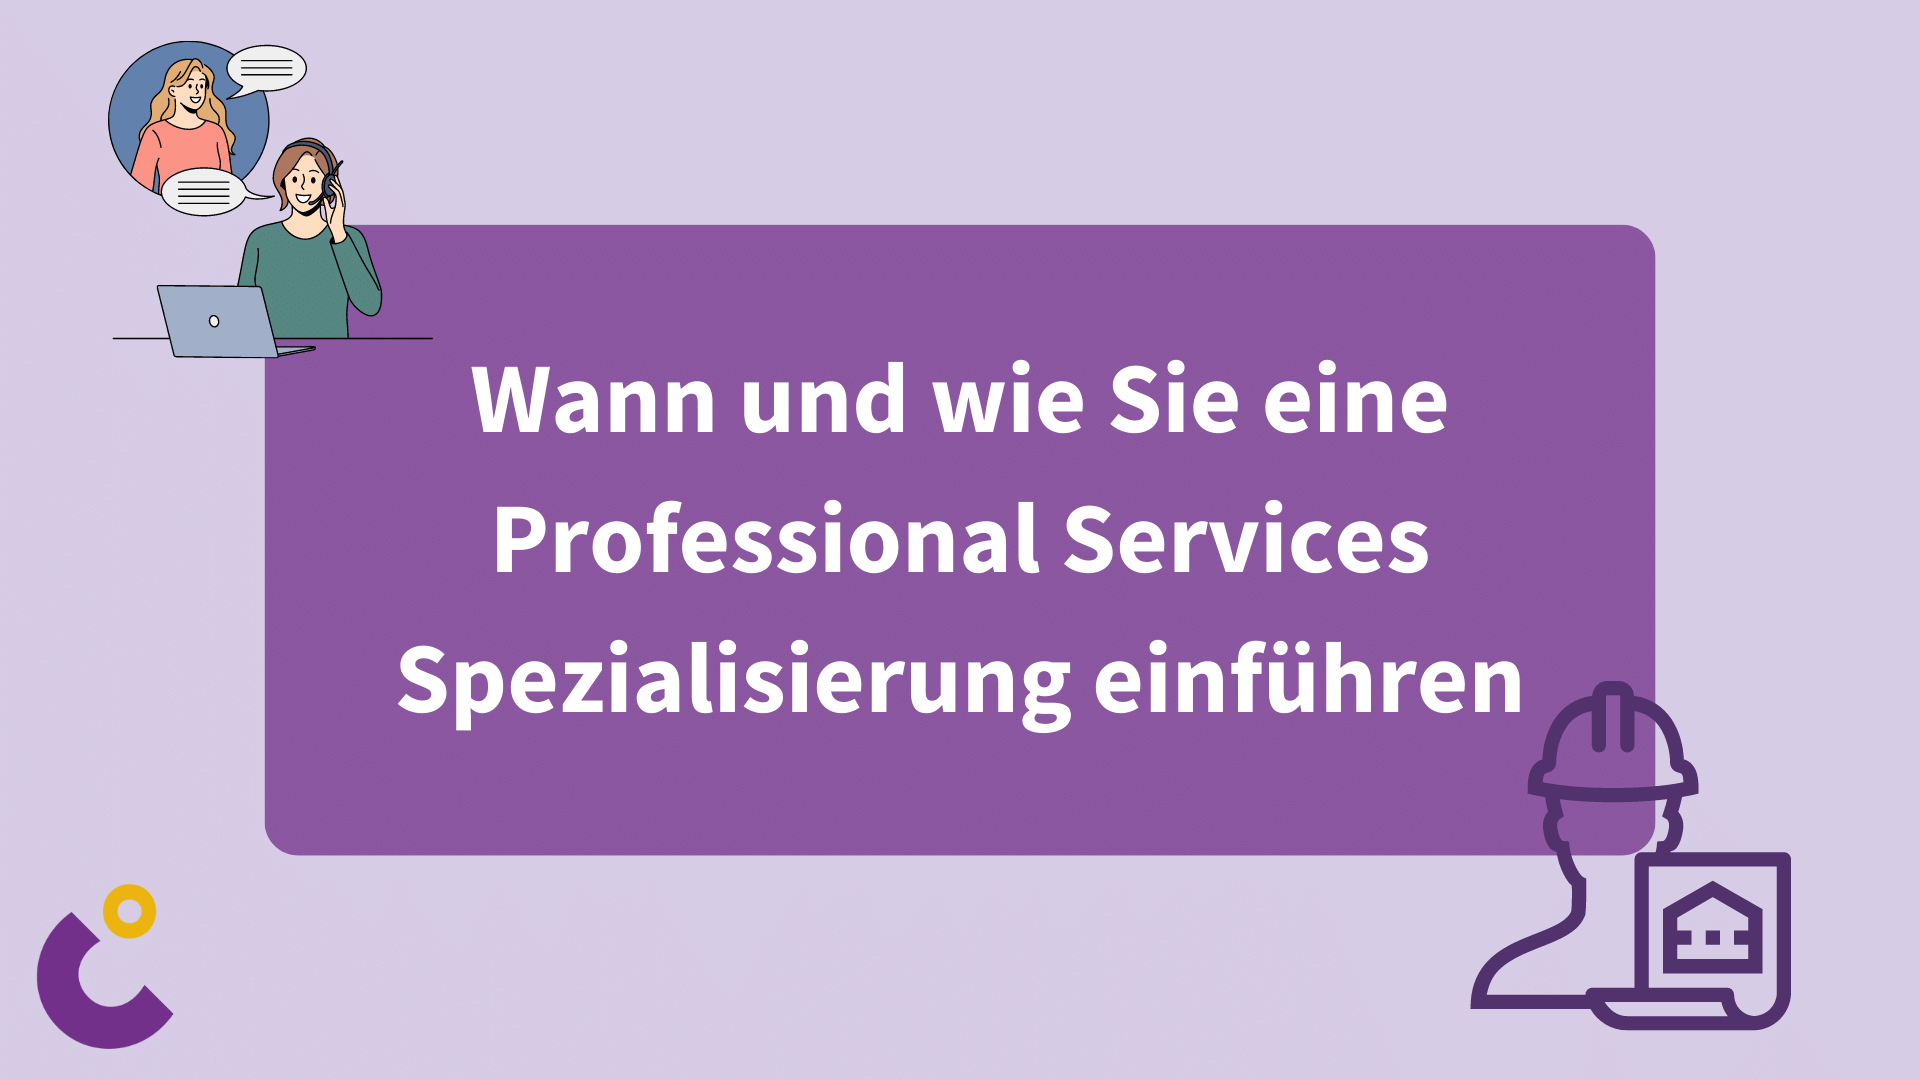 When and how to introduce a Professional Services specialization